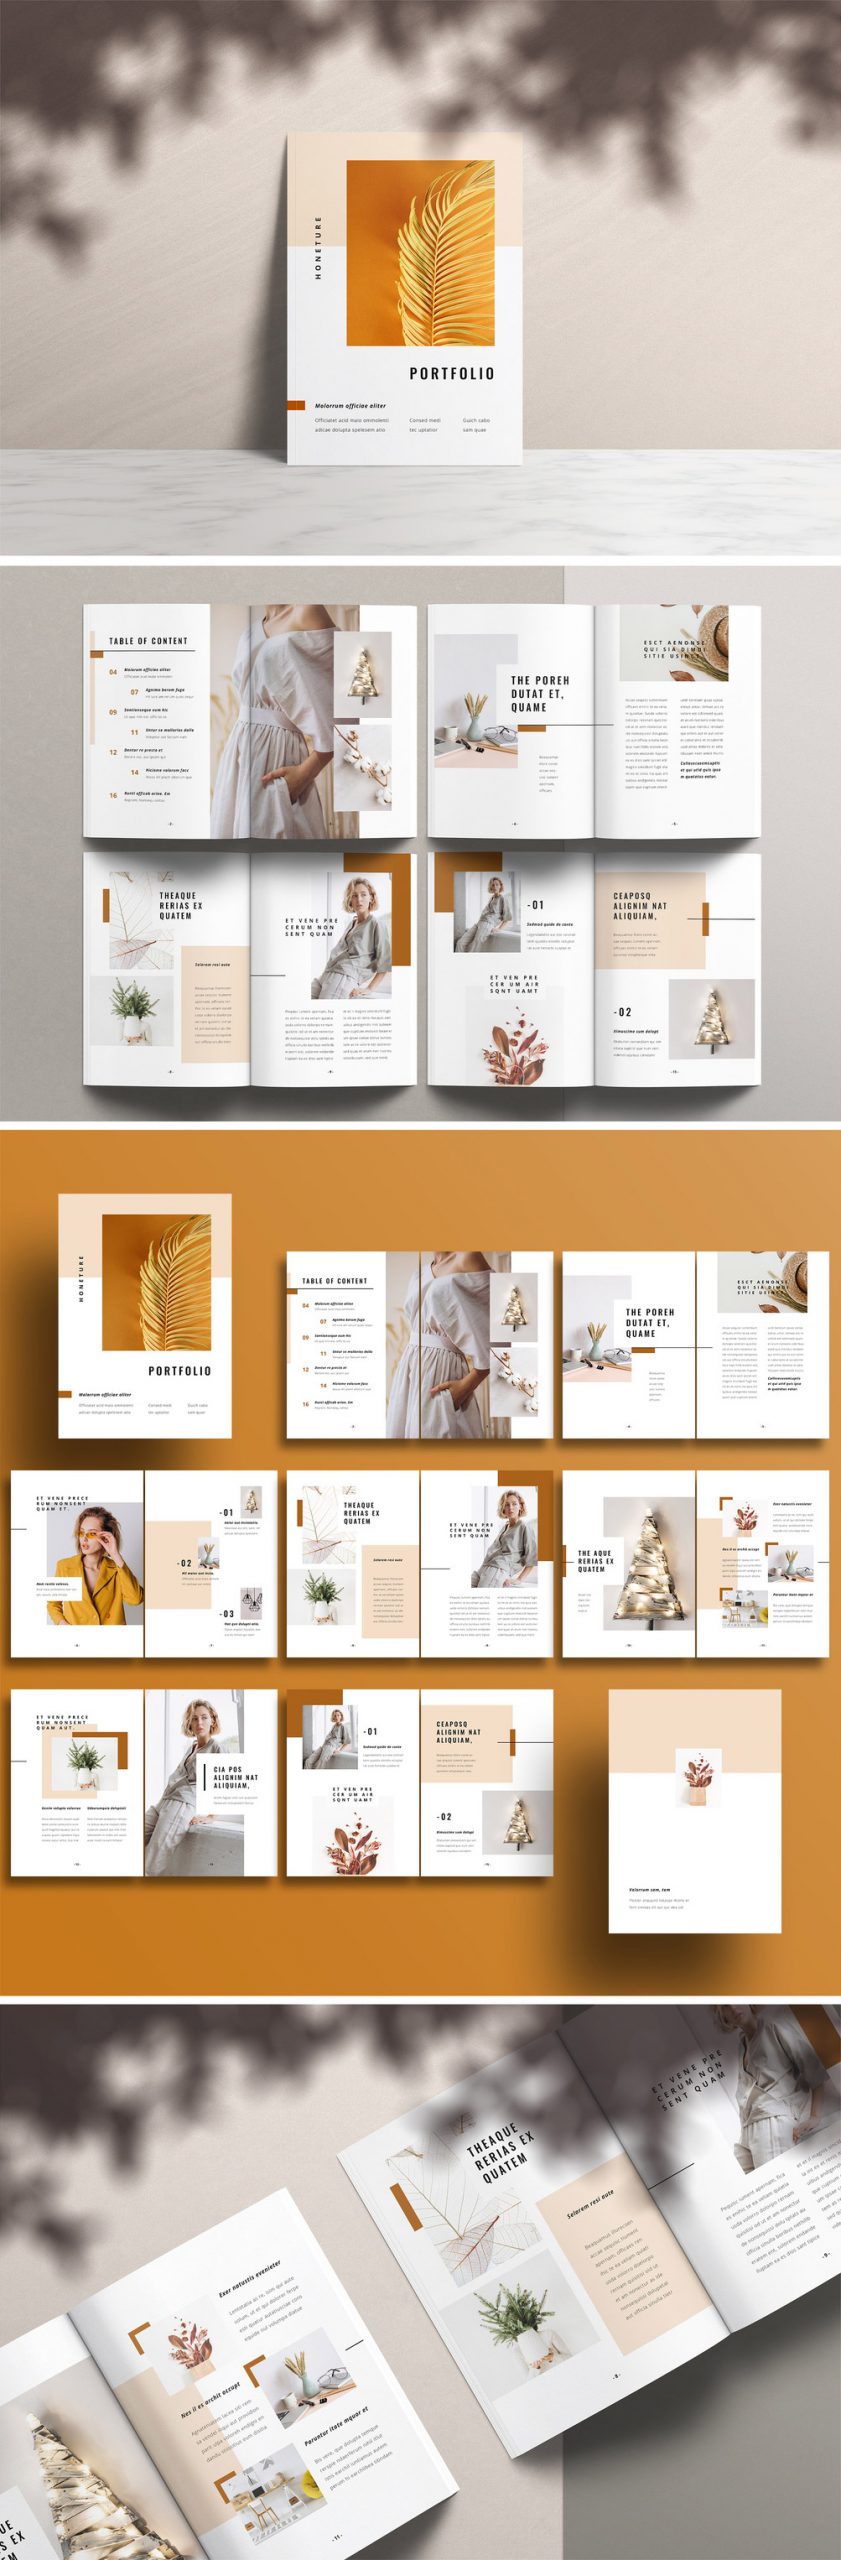 Modern, Elegant Portfolio Template with Brown Elements and Accents